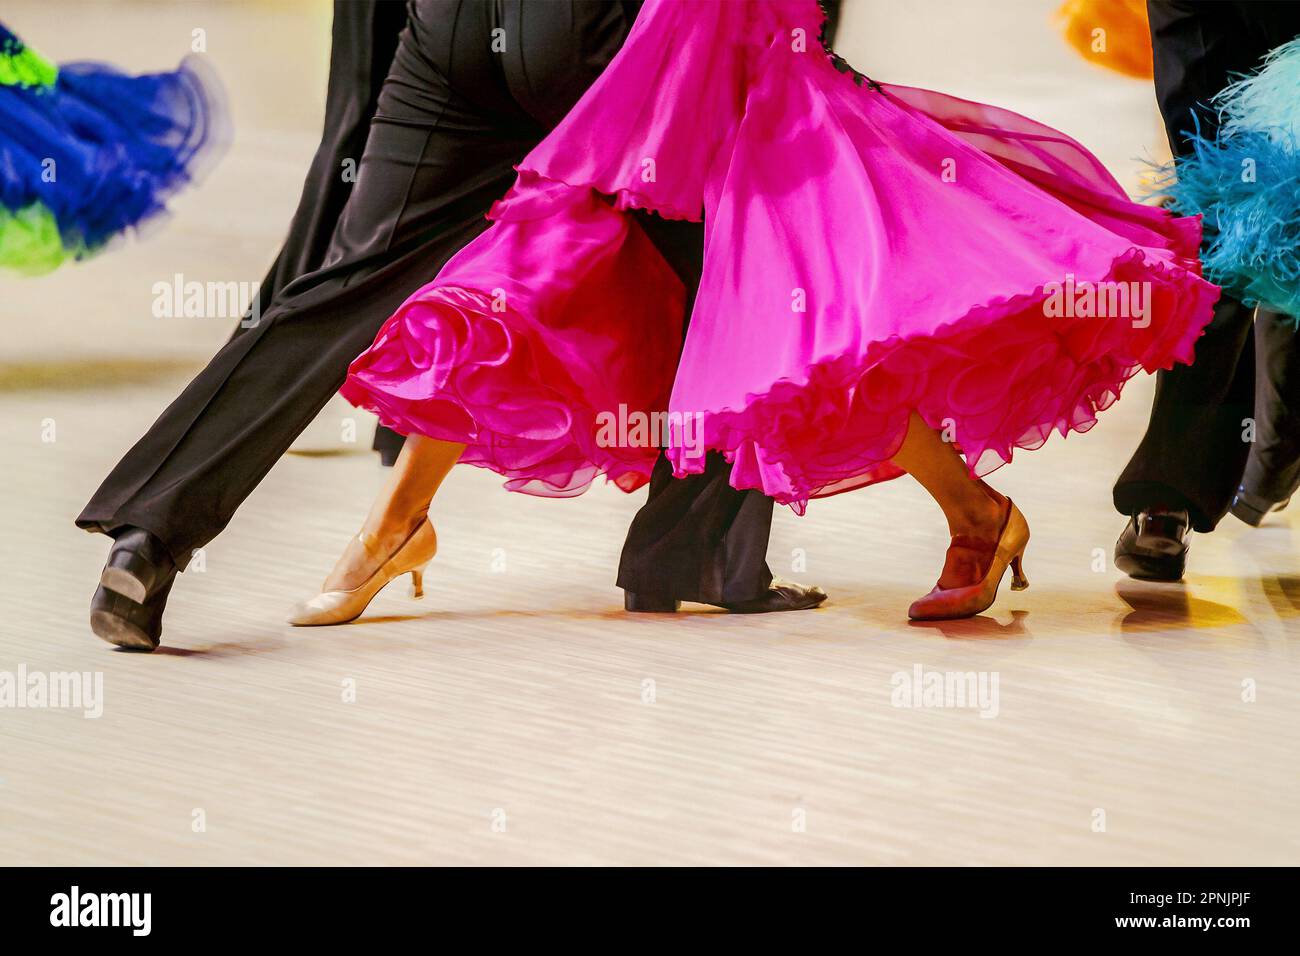 close-up part pink ball gown and and man black tail suit on dance floor Stock Photo